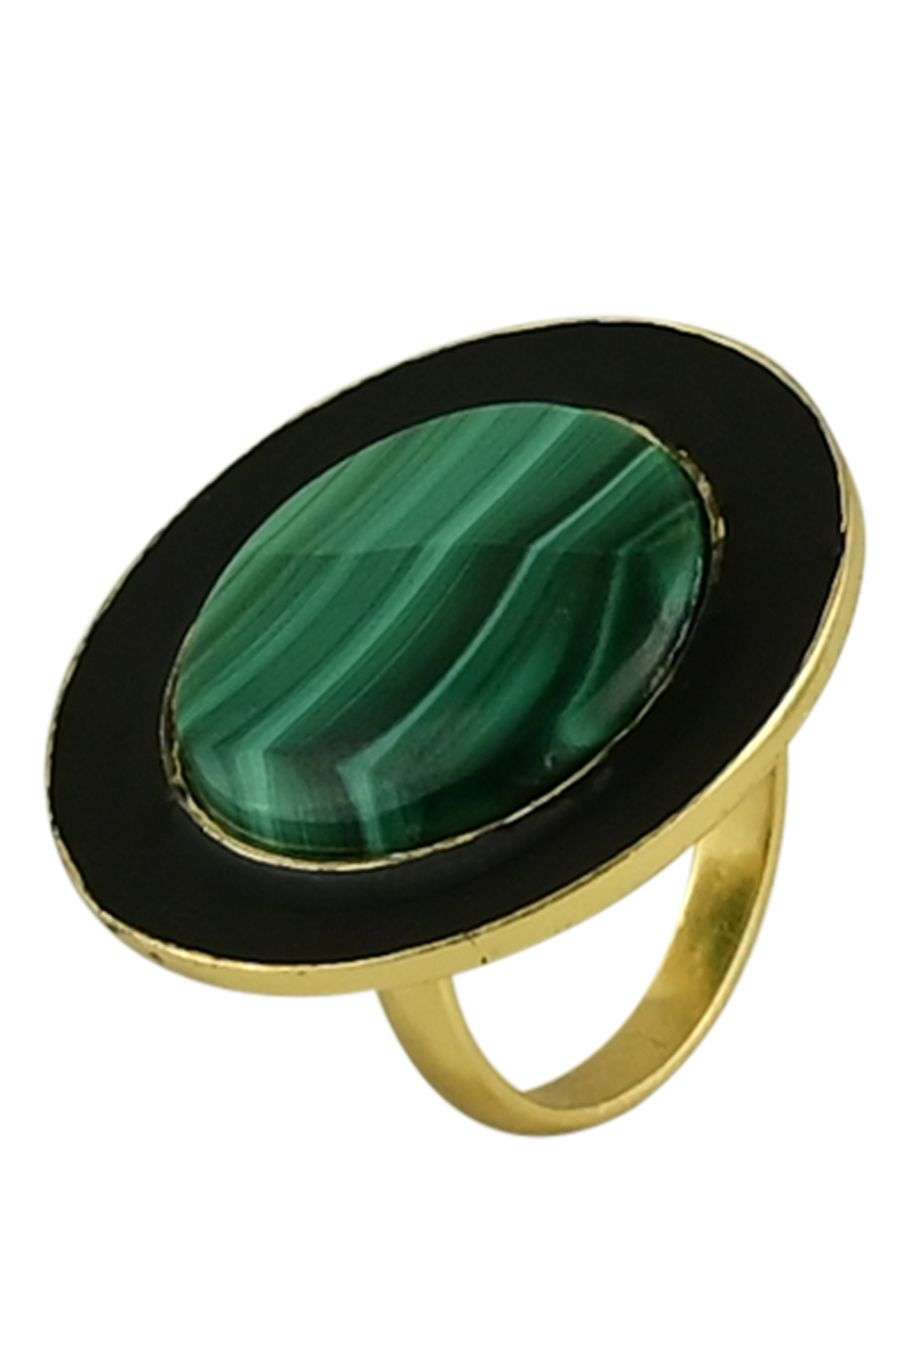 Vintage Gold Plated Ring w. Emerald Green Pendant & Pearl | Eunoia Selects